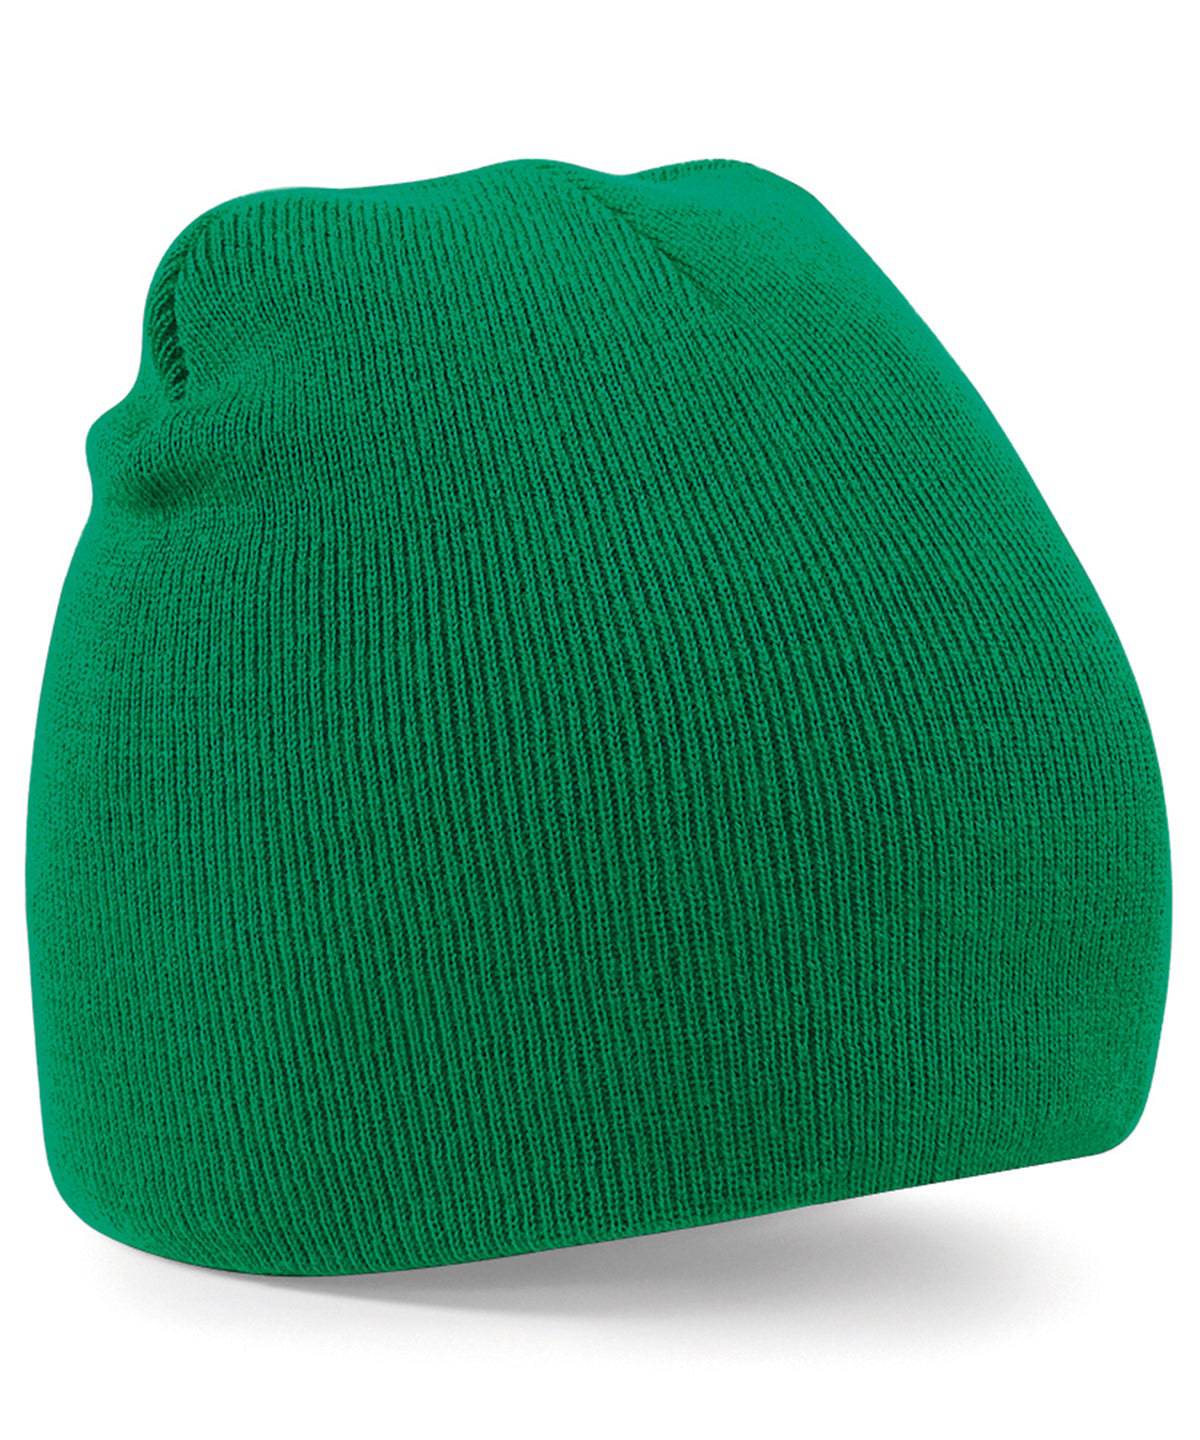 Kelly Green - Two-tone pull-on beanie